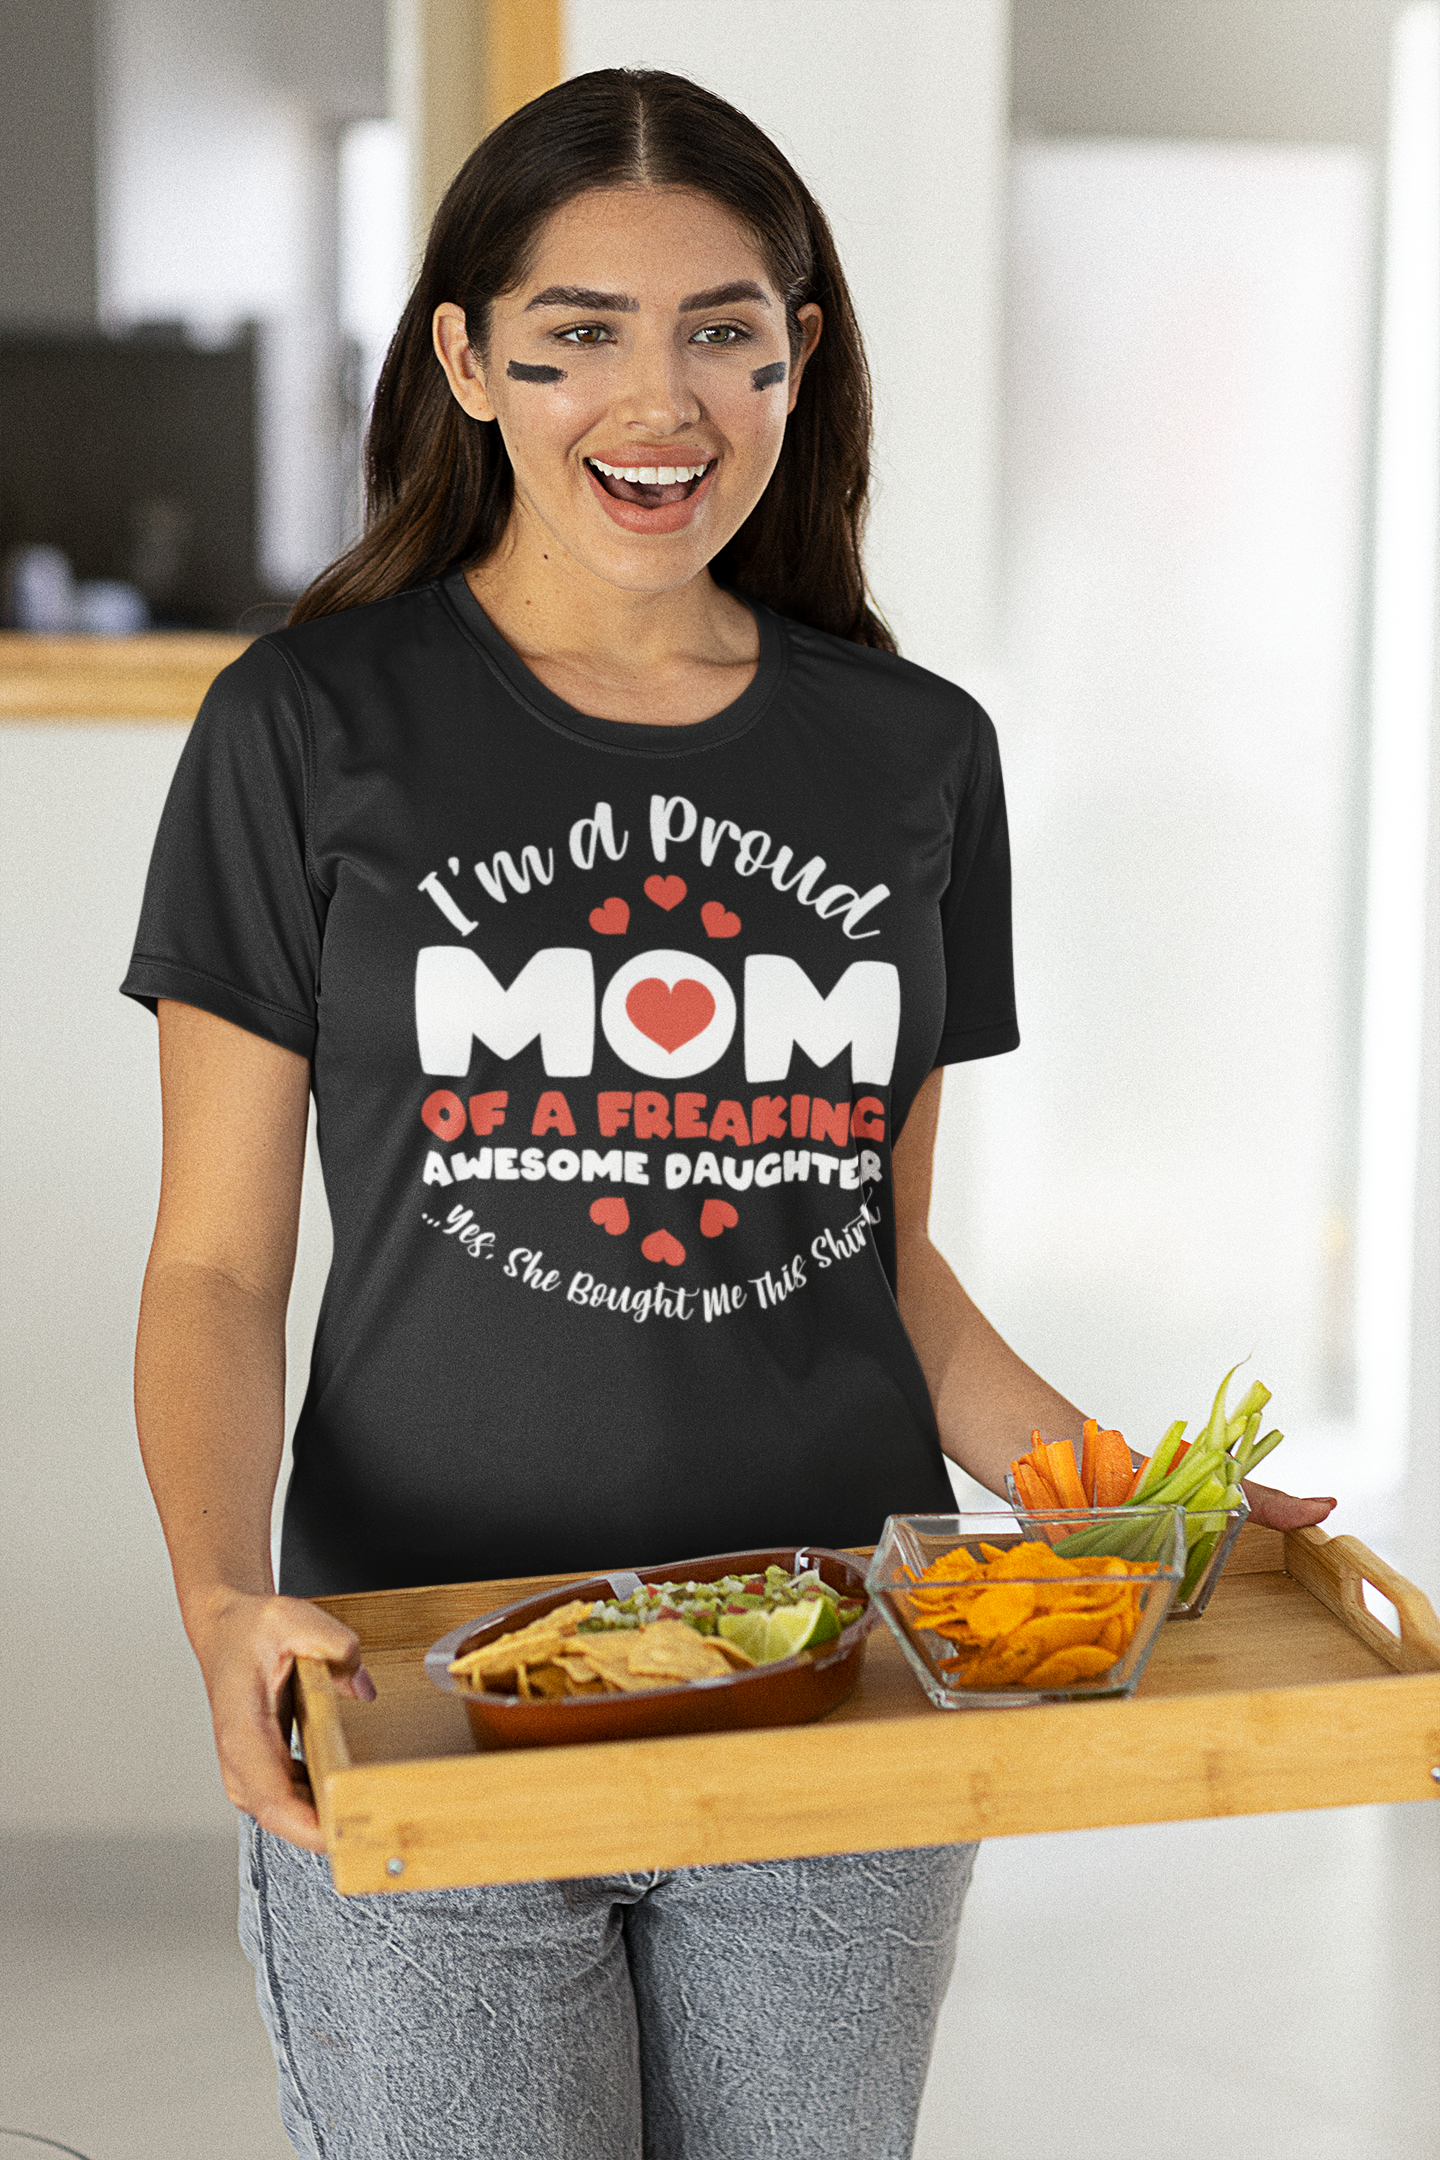 im a proud mom of a freaking awesome daughter t shirt